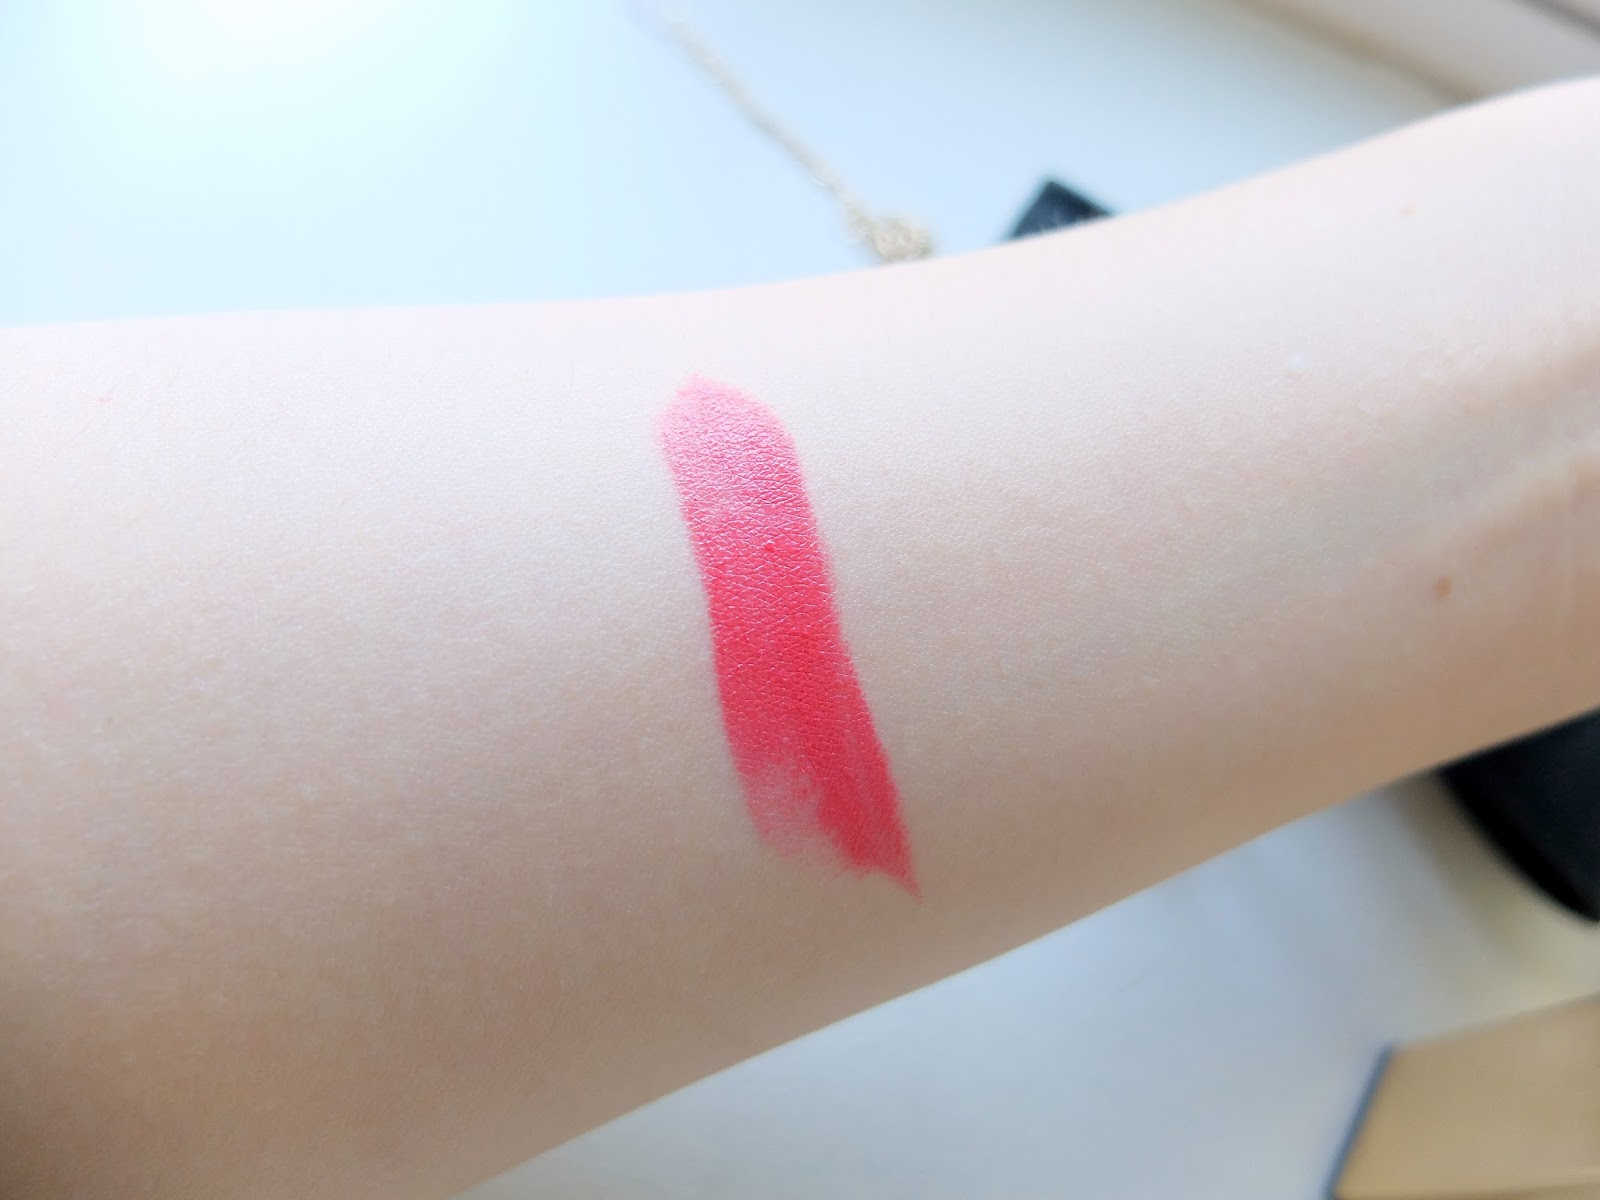 ysl pur couture #52 swatch my love from another star